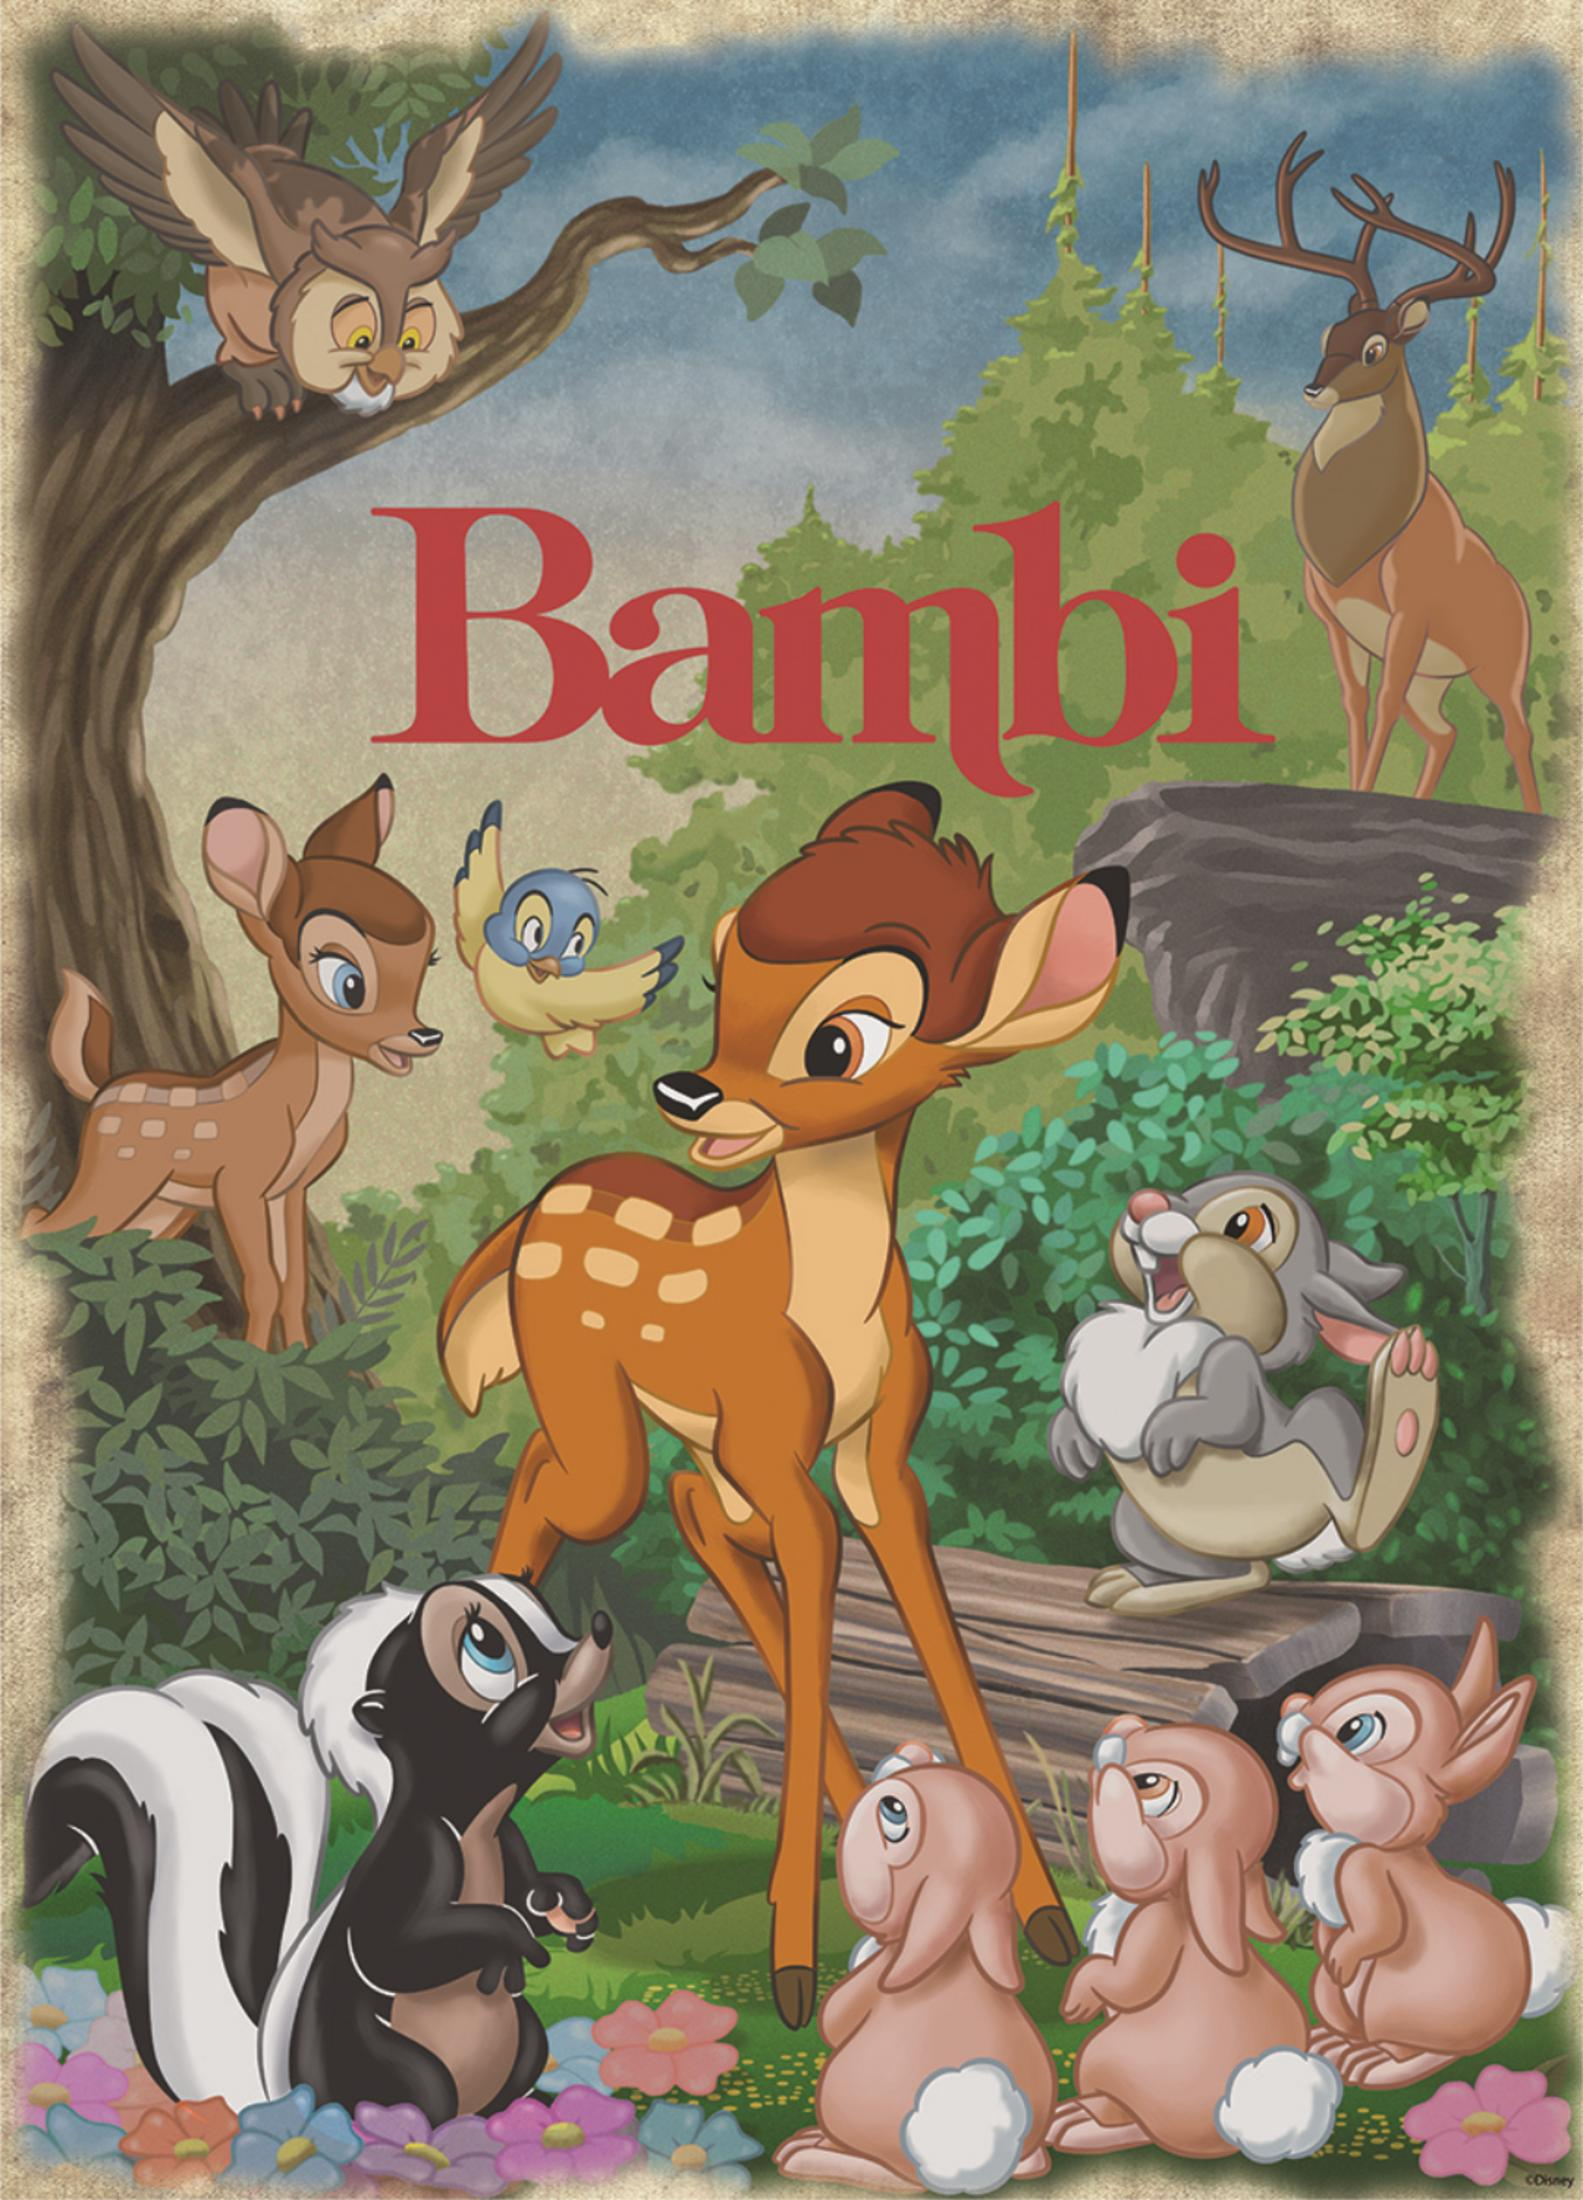 Puzzle COLLECTION 19491 BAMBI TEILE 1000 DISNEY JUMBO - CLASSIC